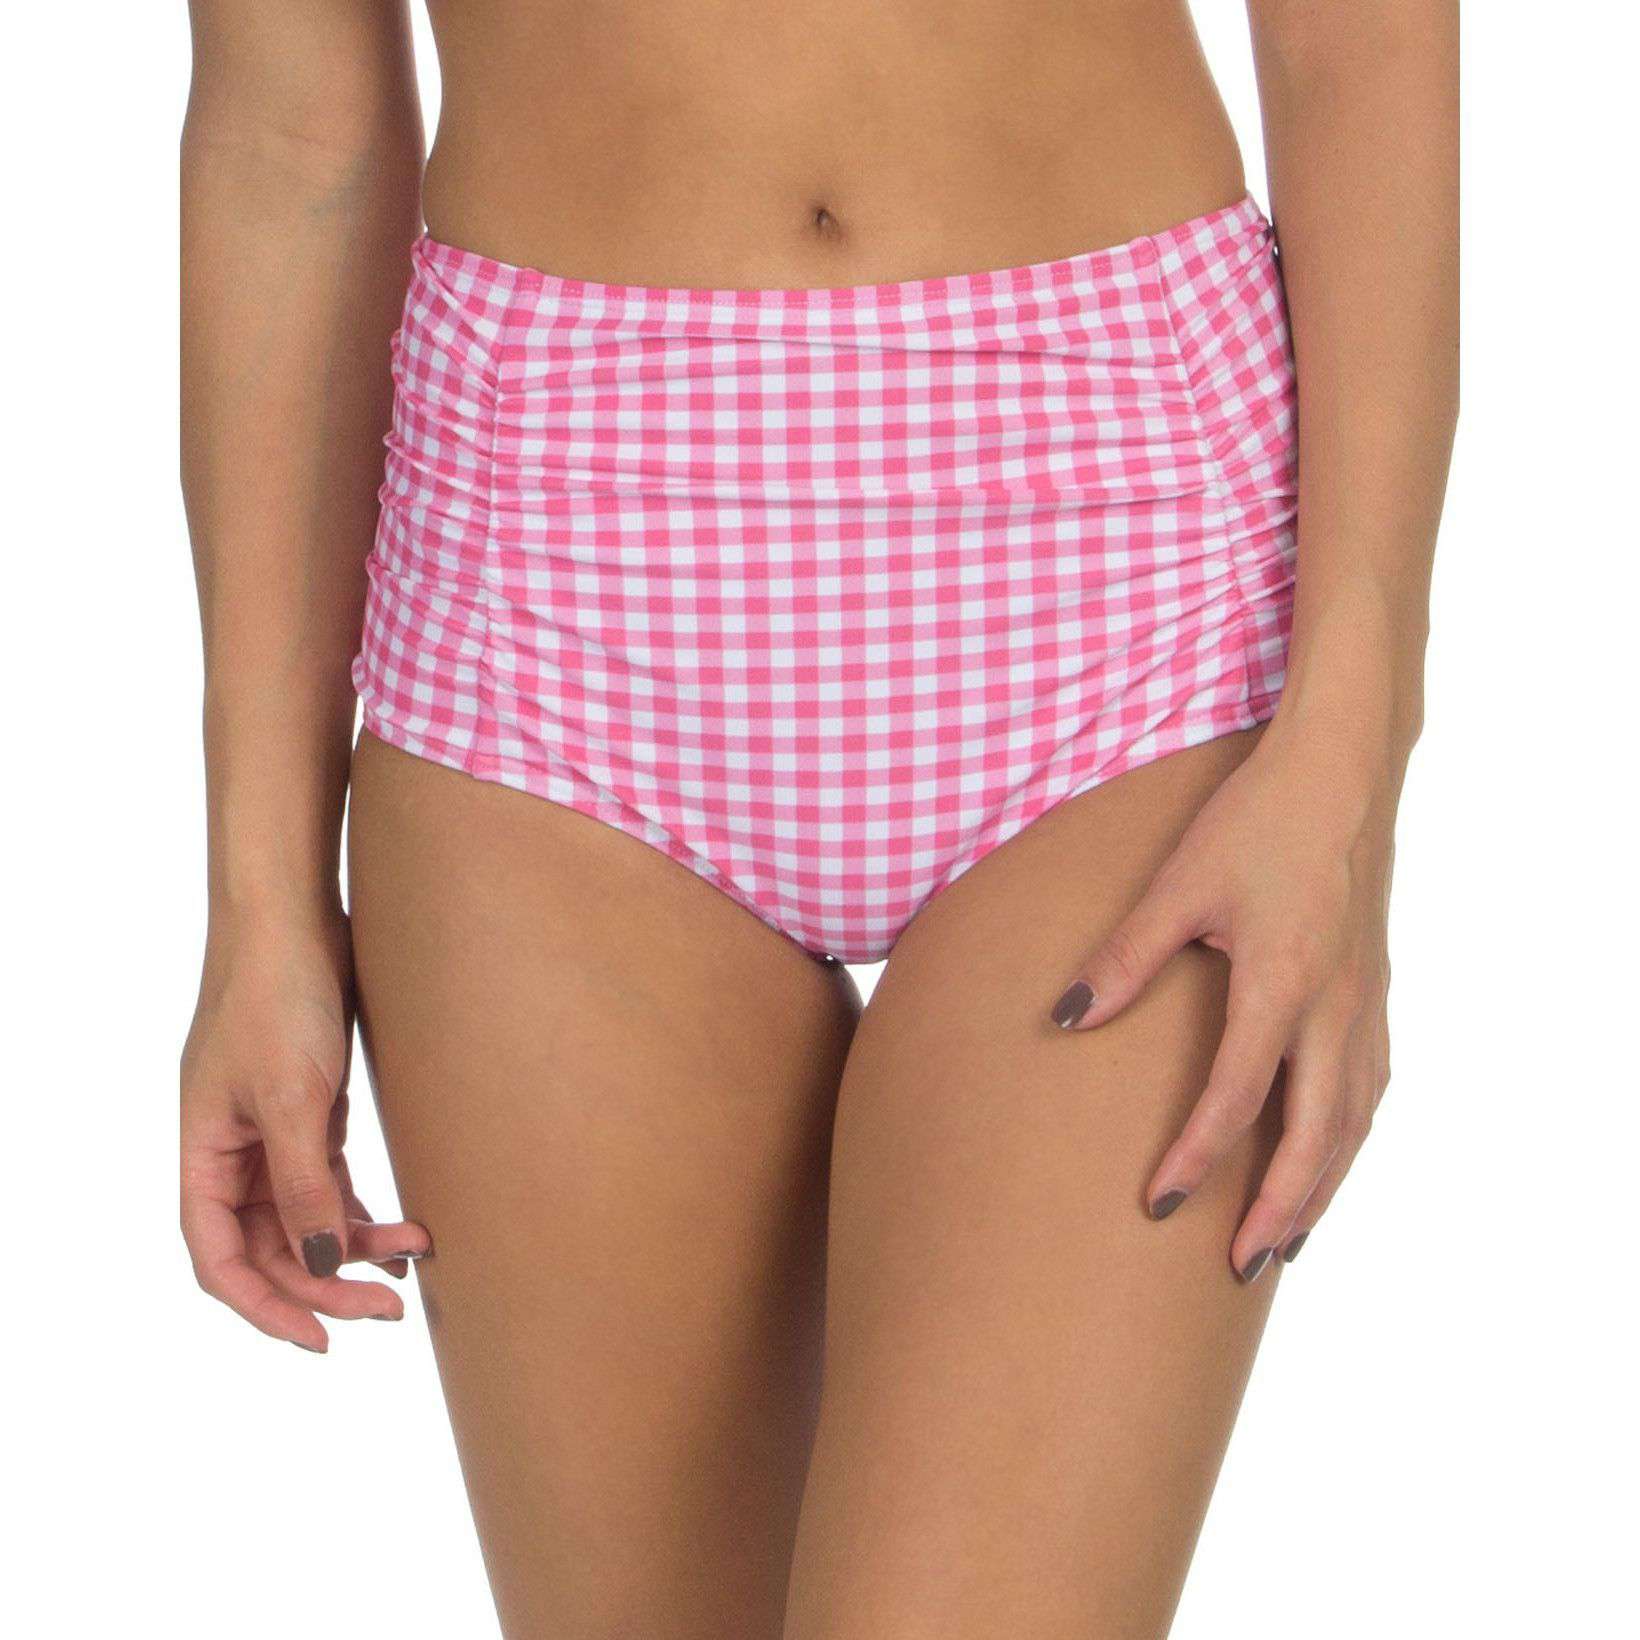 Gingham High-Waisted Bikini Bottom in Pink by Lauren James - Country Club Prep